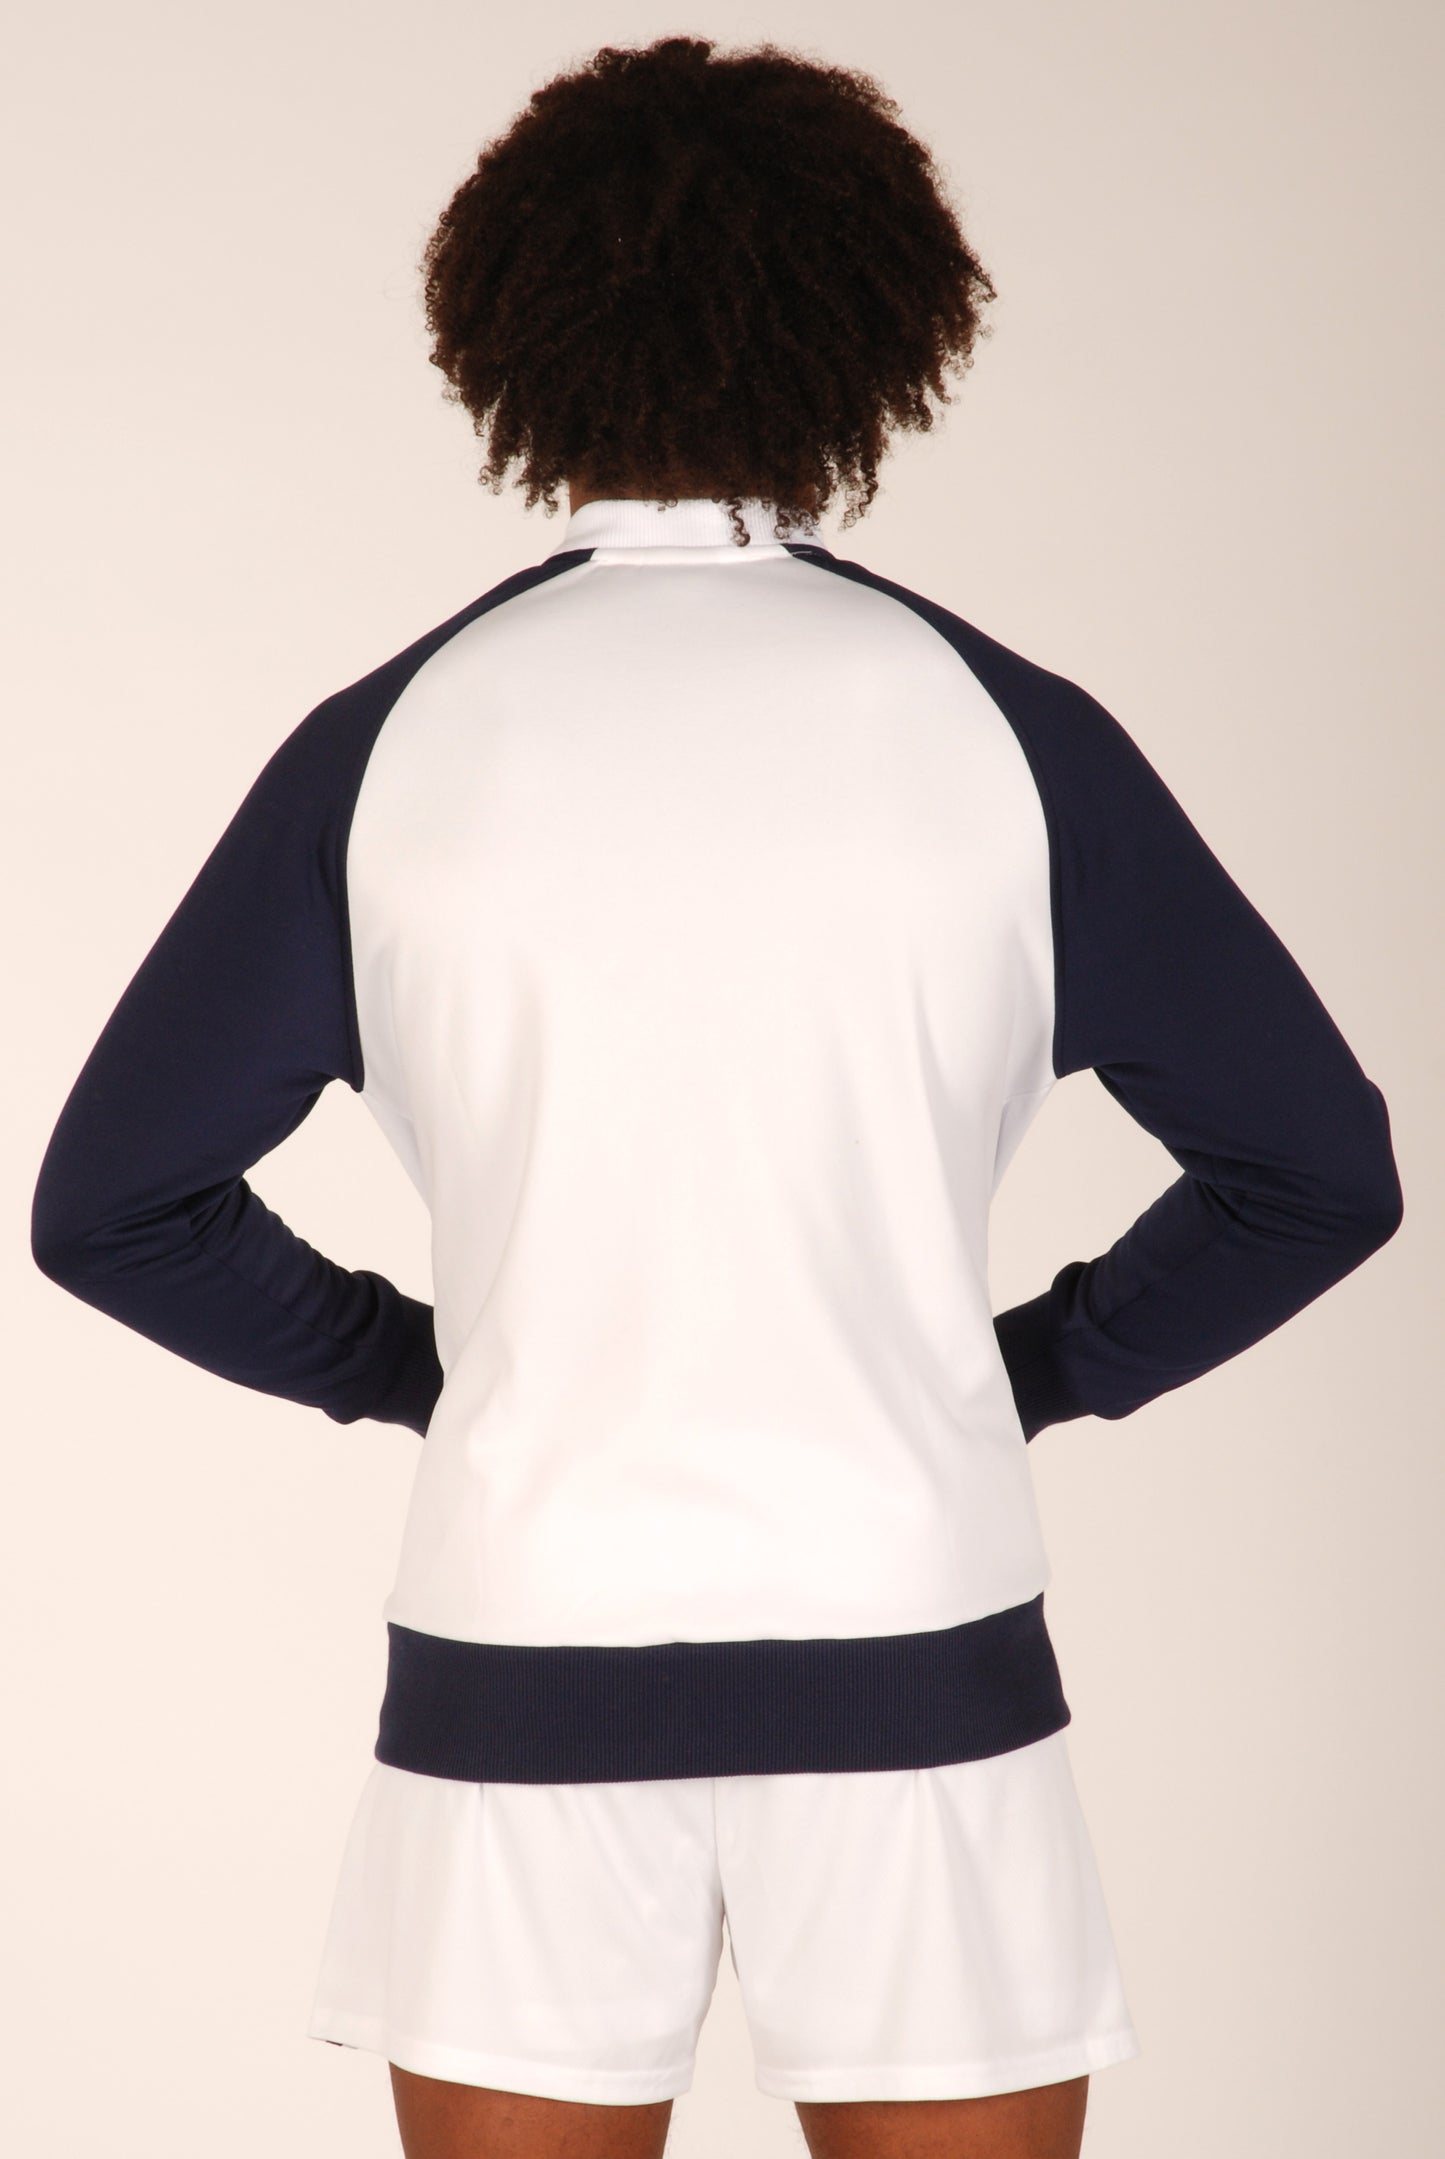 KRONK Iconic Detroit Zip Track Top Navy and White